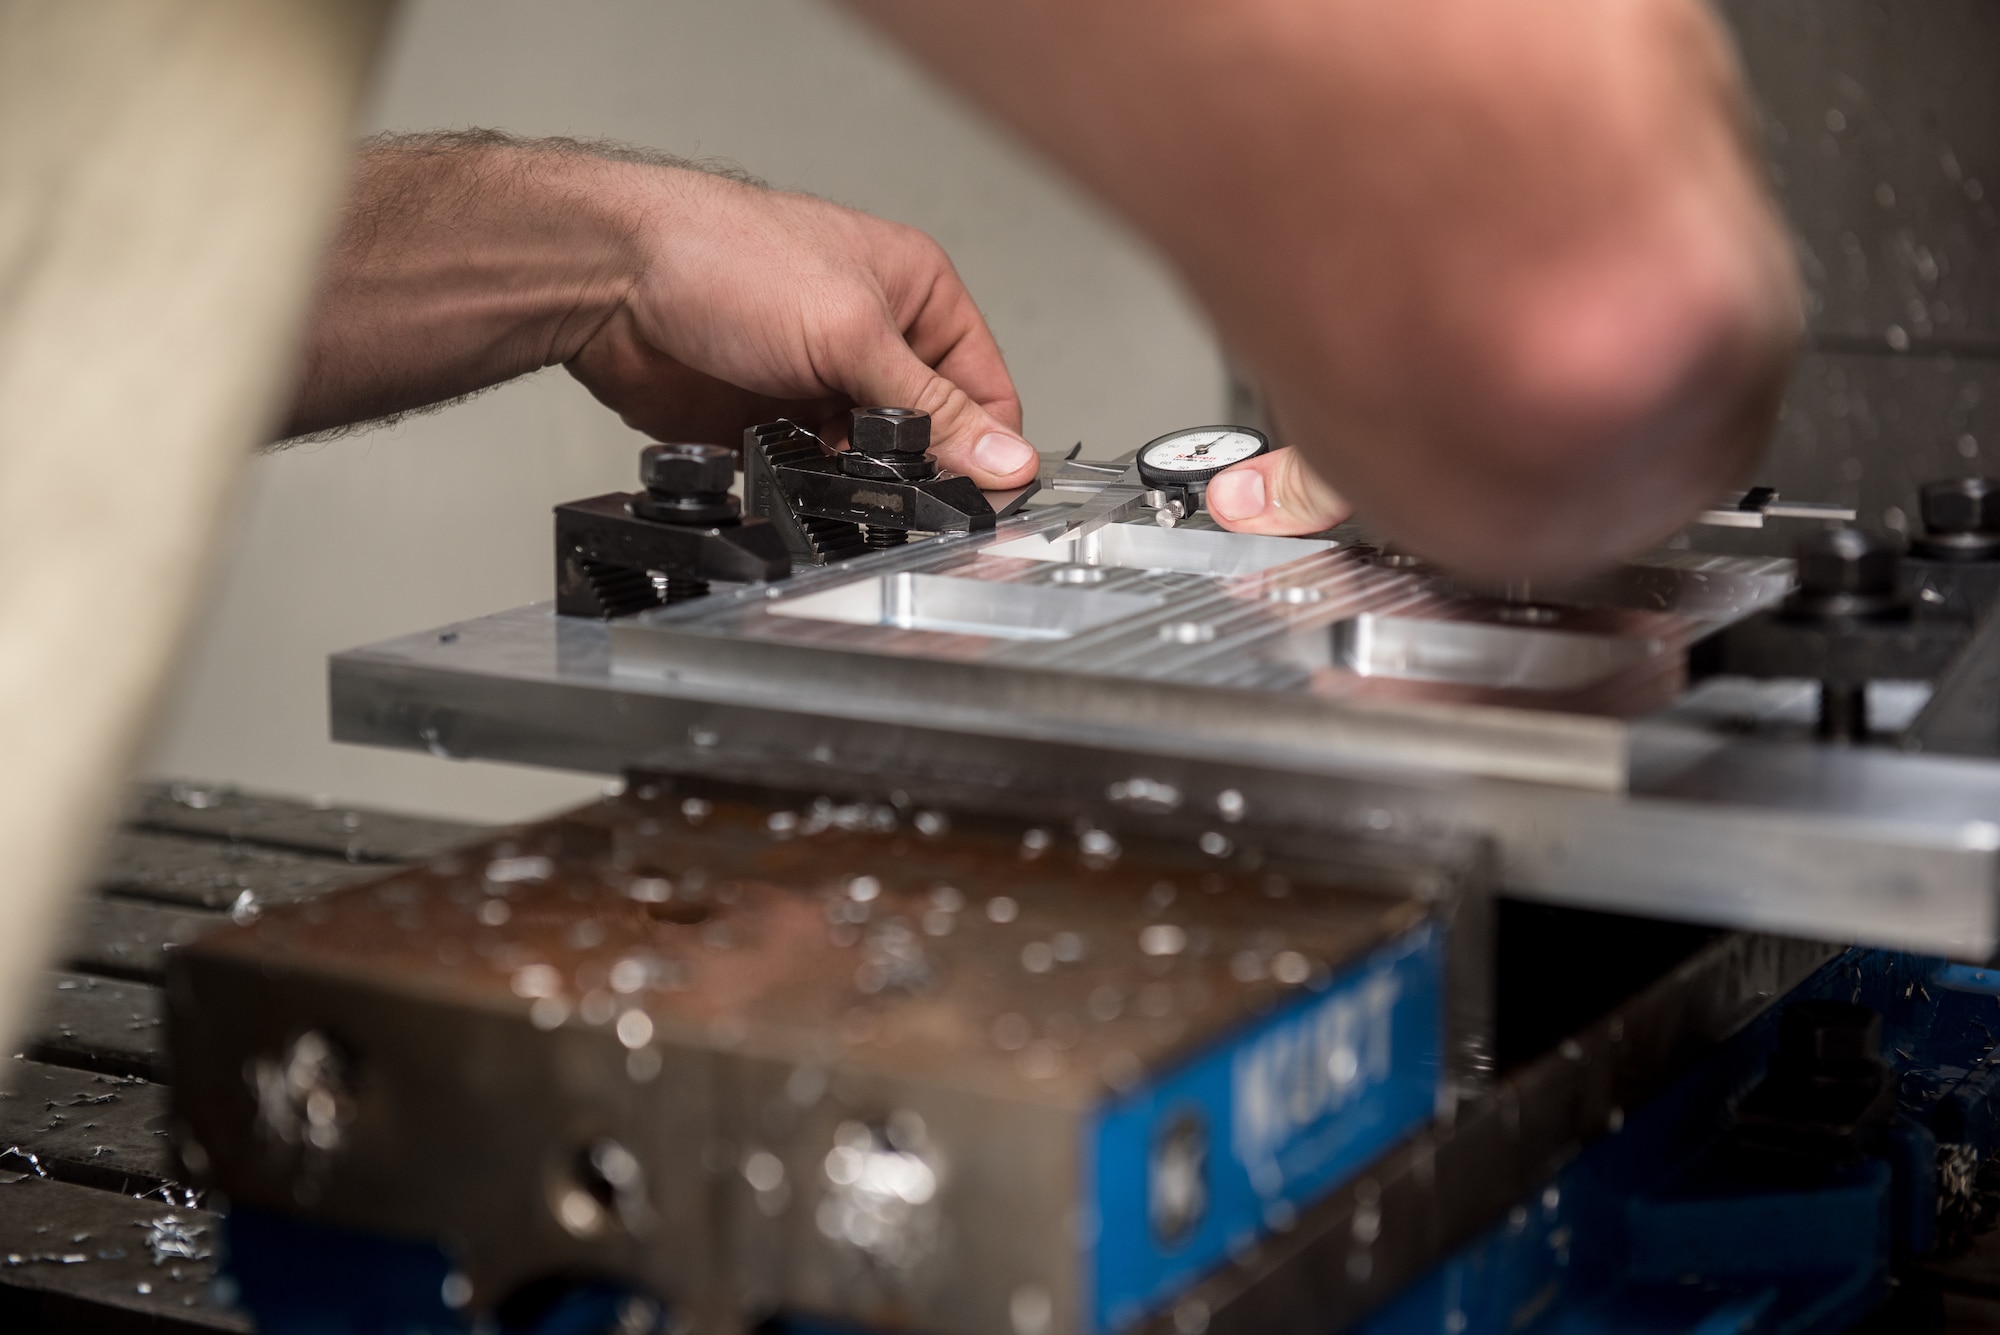 Staff Sgt. Tyler Dickson, 512th Maintenance Squadron aircraft metal technician, measures drill holes on an aluminum plate at Dover Air Force Base, Delaware, Jan. 6, 2019. Dickson utilized the vertical mill computer numeric system to engineer a replica of one of three  sample plates needed for a HH-60G Pave Hawk helicopter. (U.S. Air Force photo by Staff Sgt. Damien Taylor)